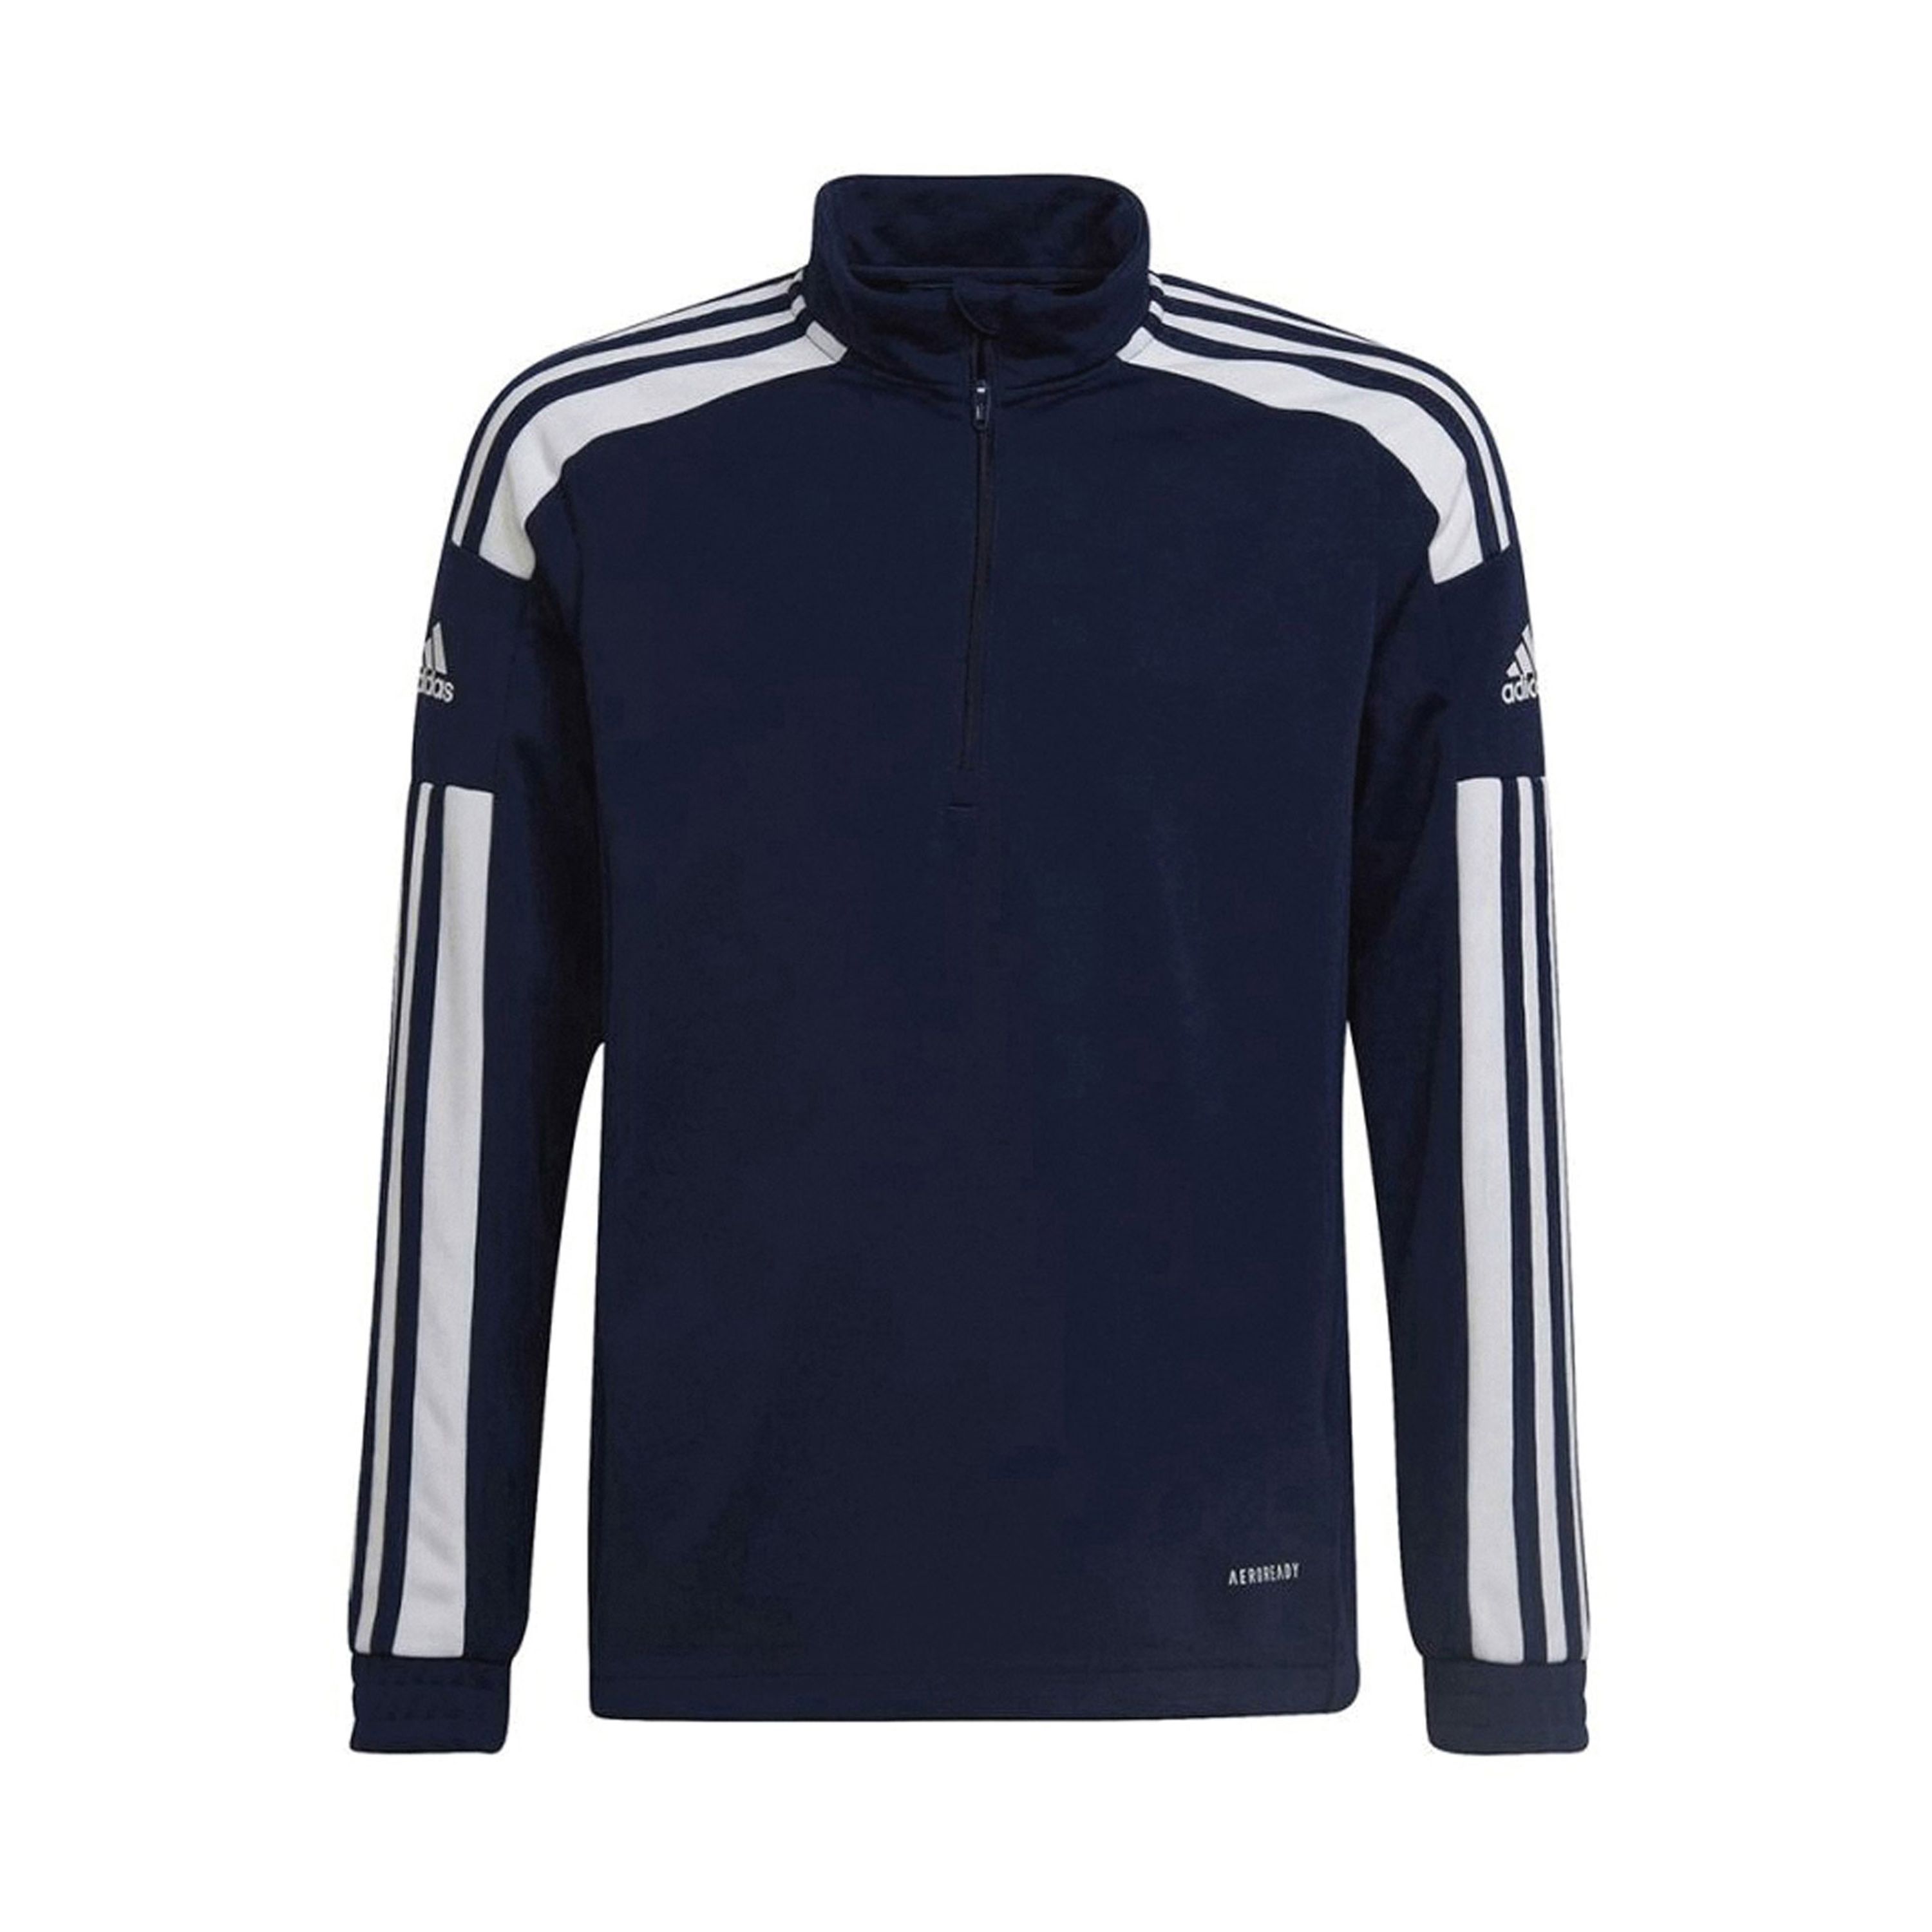 Adidas Perfor ce sportpully donkerblauw wit Sportsweater Gerecycled polyester Opstaande kraag 164